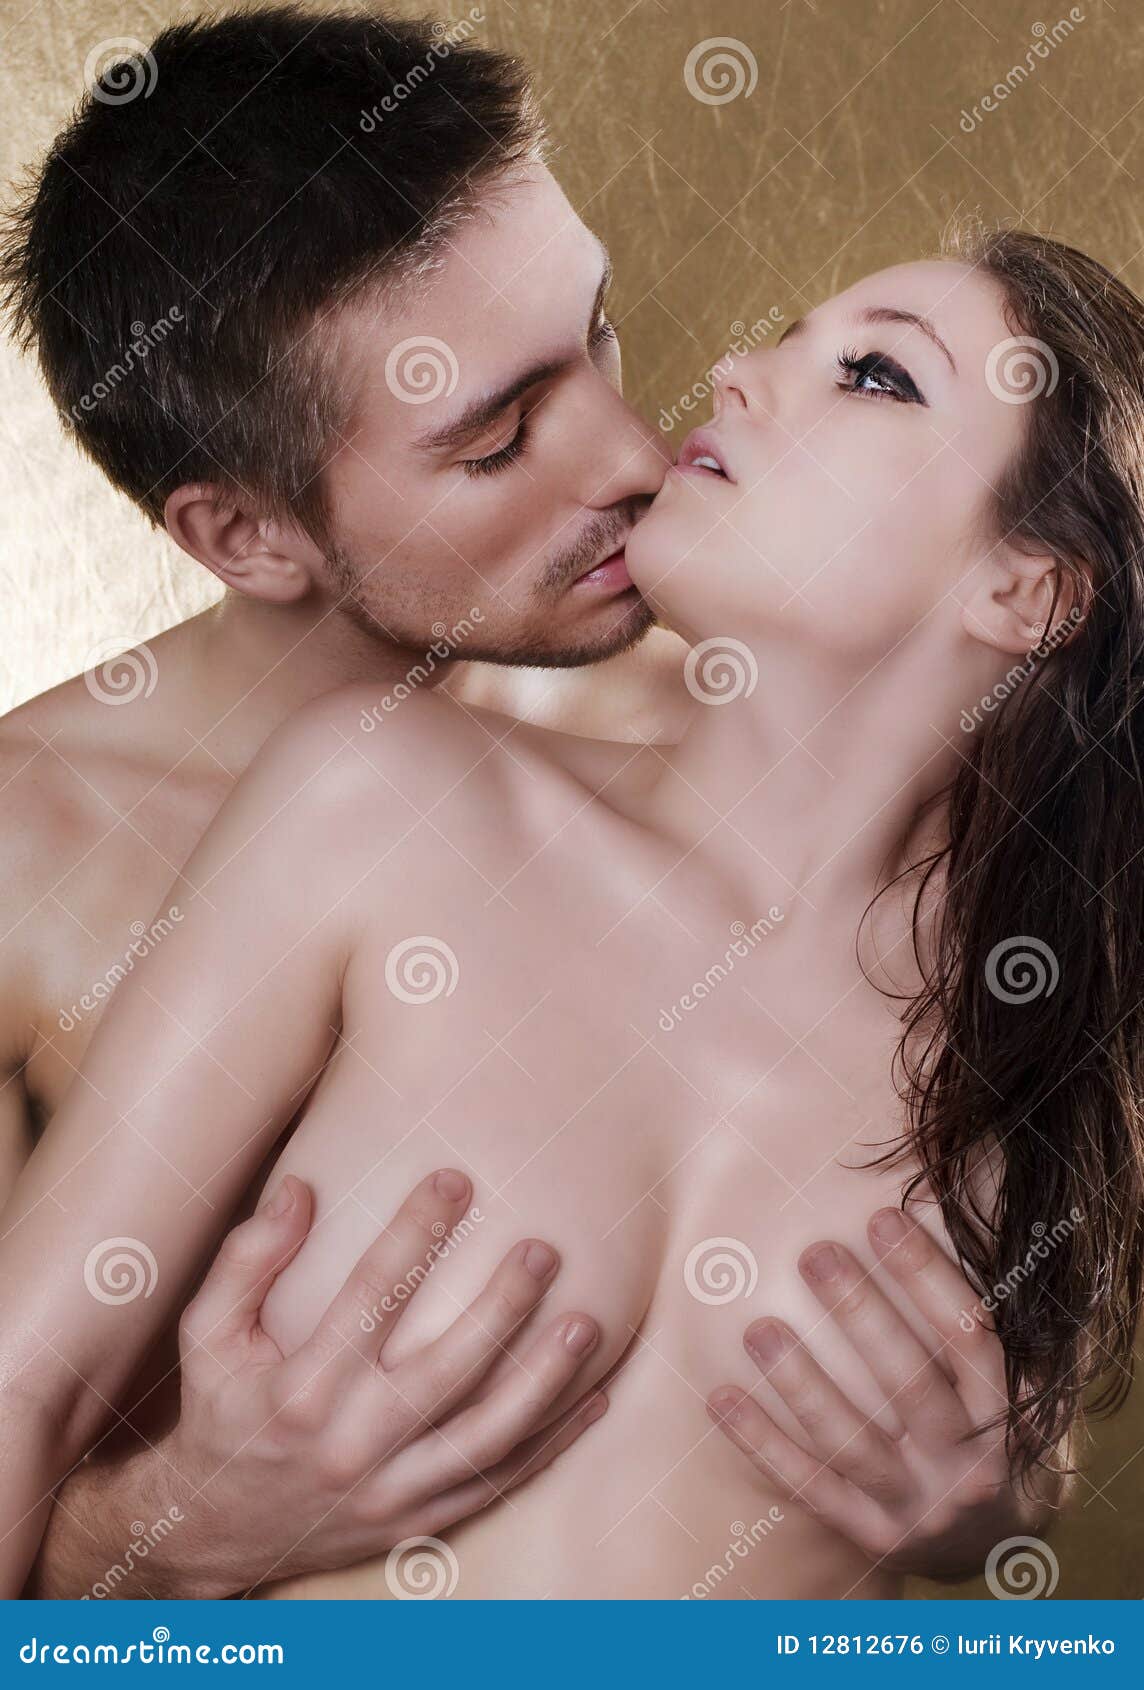 People kissing and naked